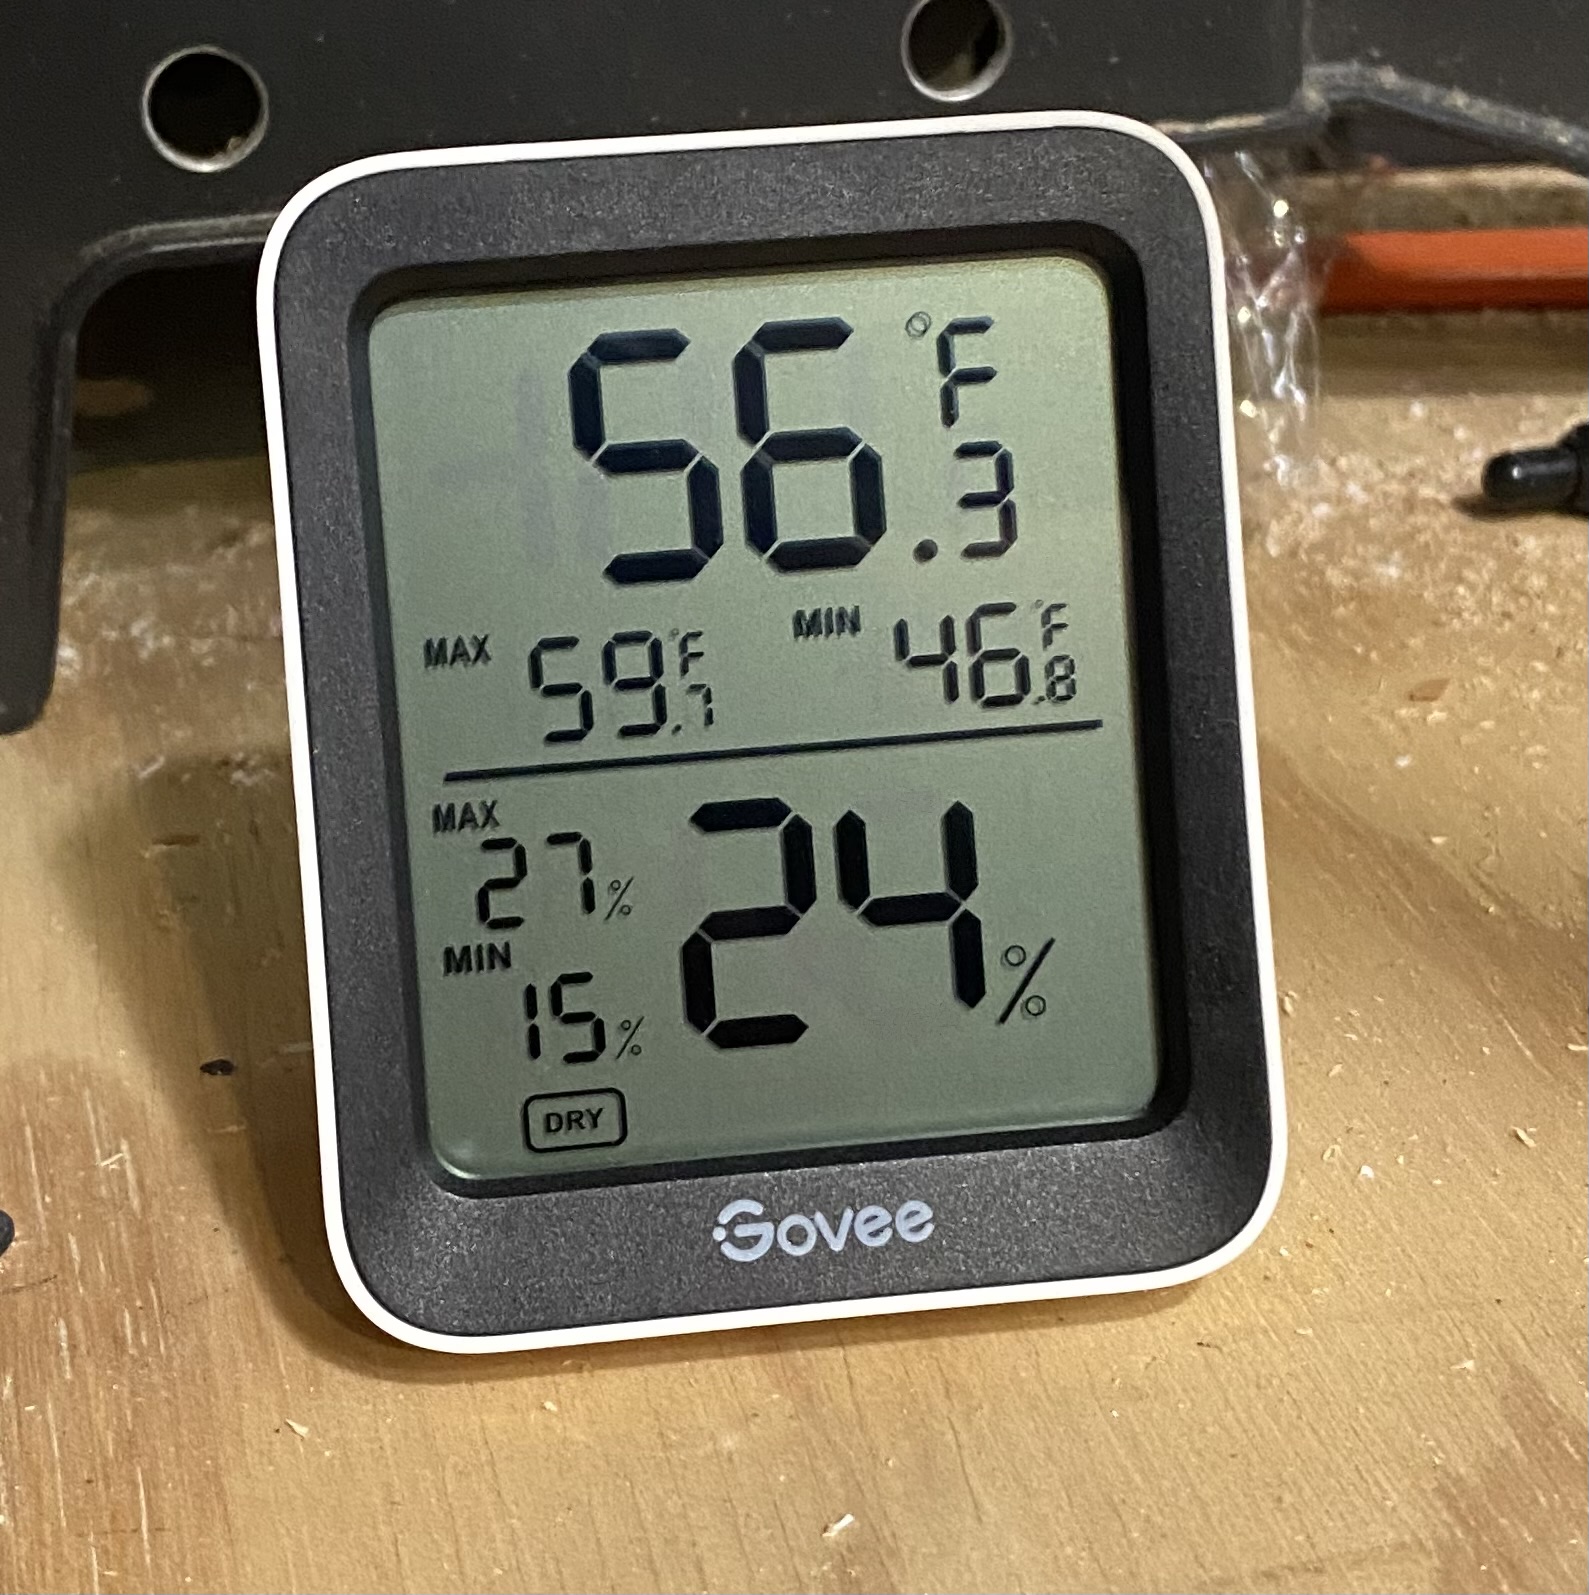 Using the Govee Bluetooth Thermometer with Home Assistant (Python and MQTT)  - Austin's Nerdy Things